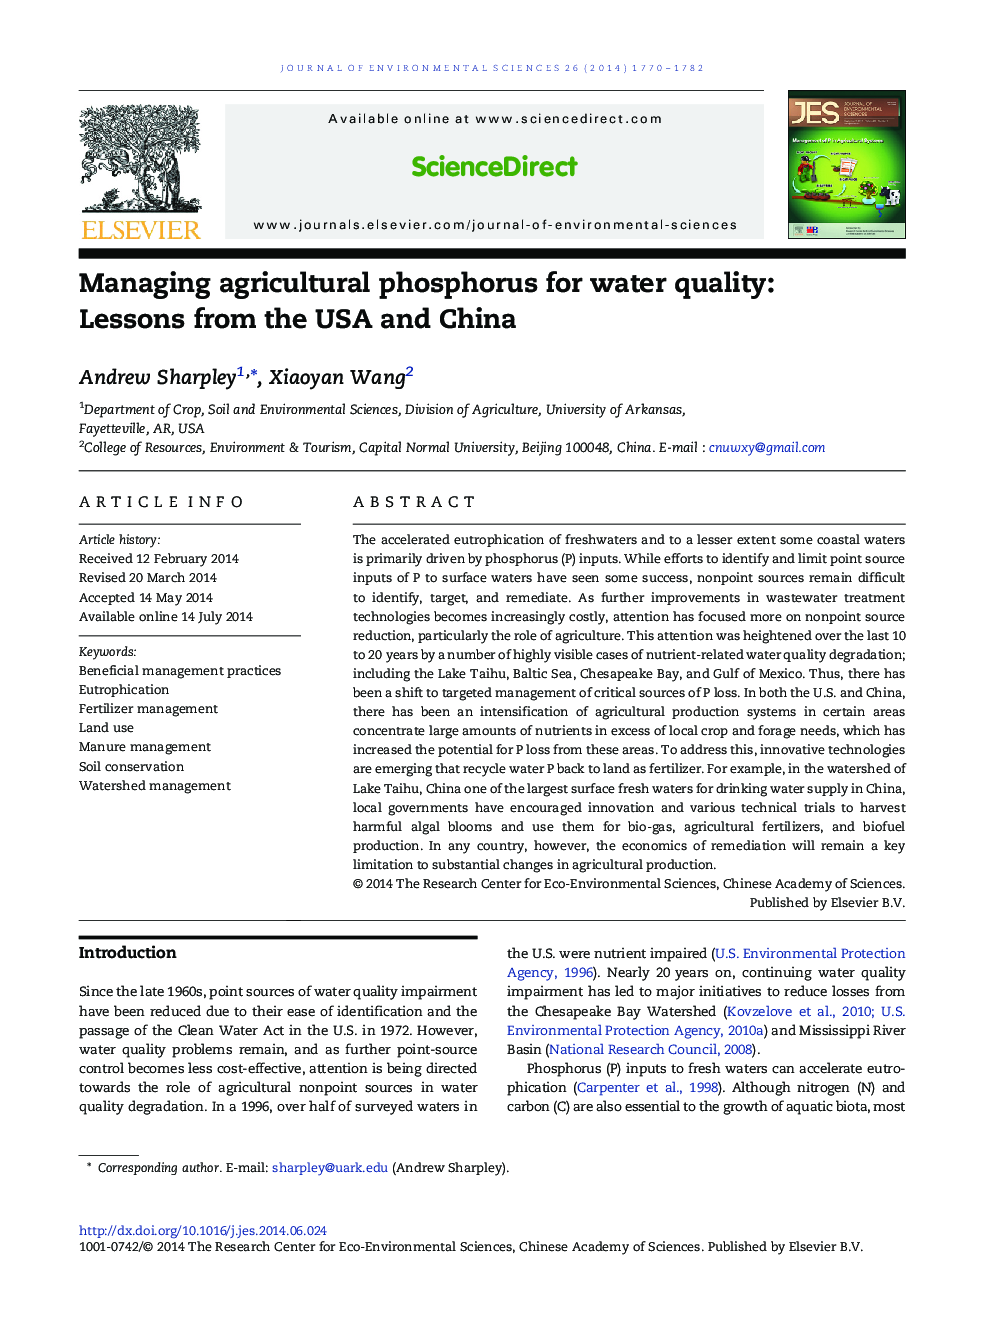 Managing agricultural phosphorus for water quality: Lessons from the USA and China